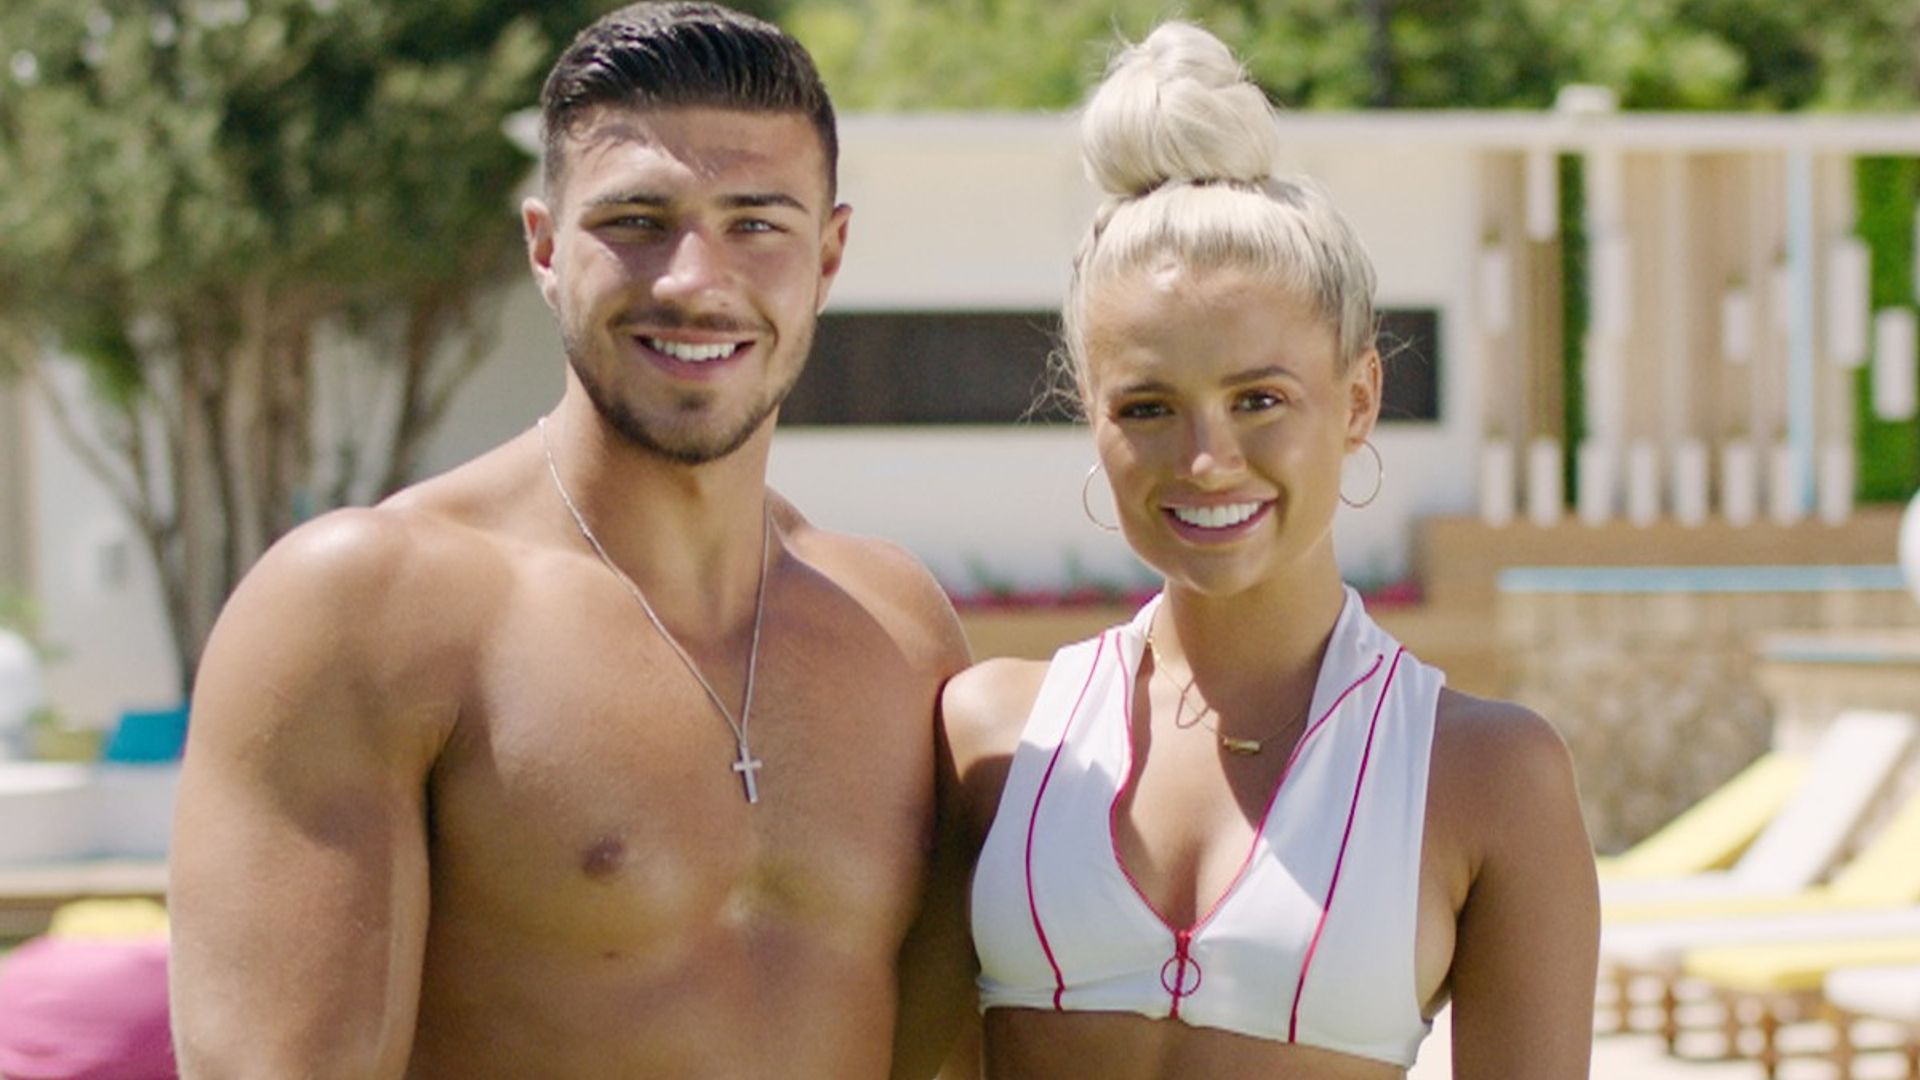 Love Island's Molly-Mae and Tommy pictured together for the first time since split rumours